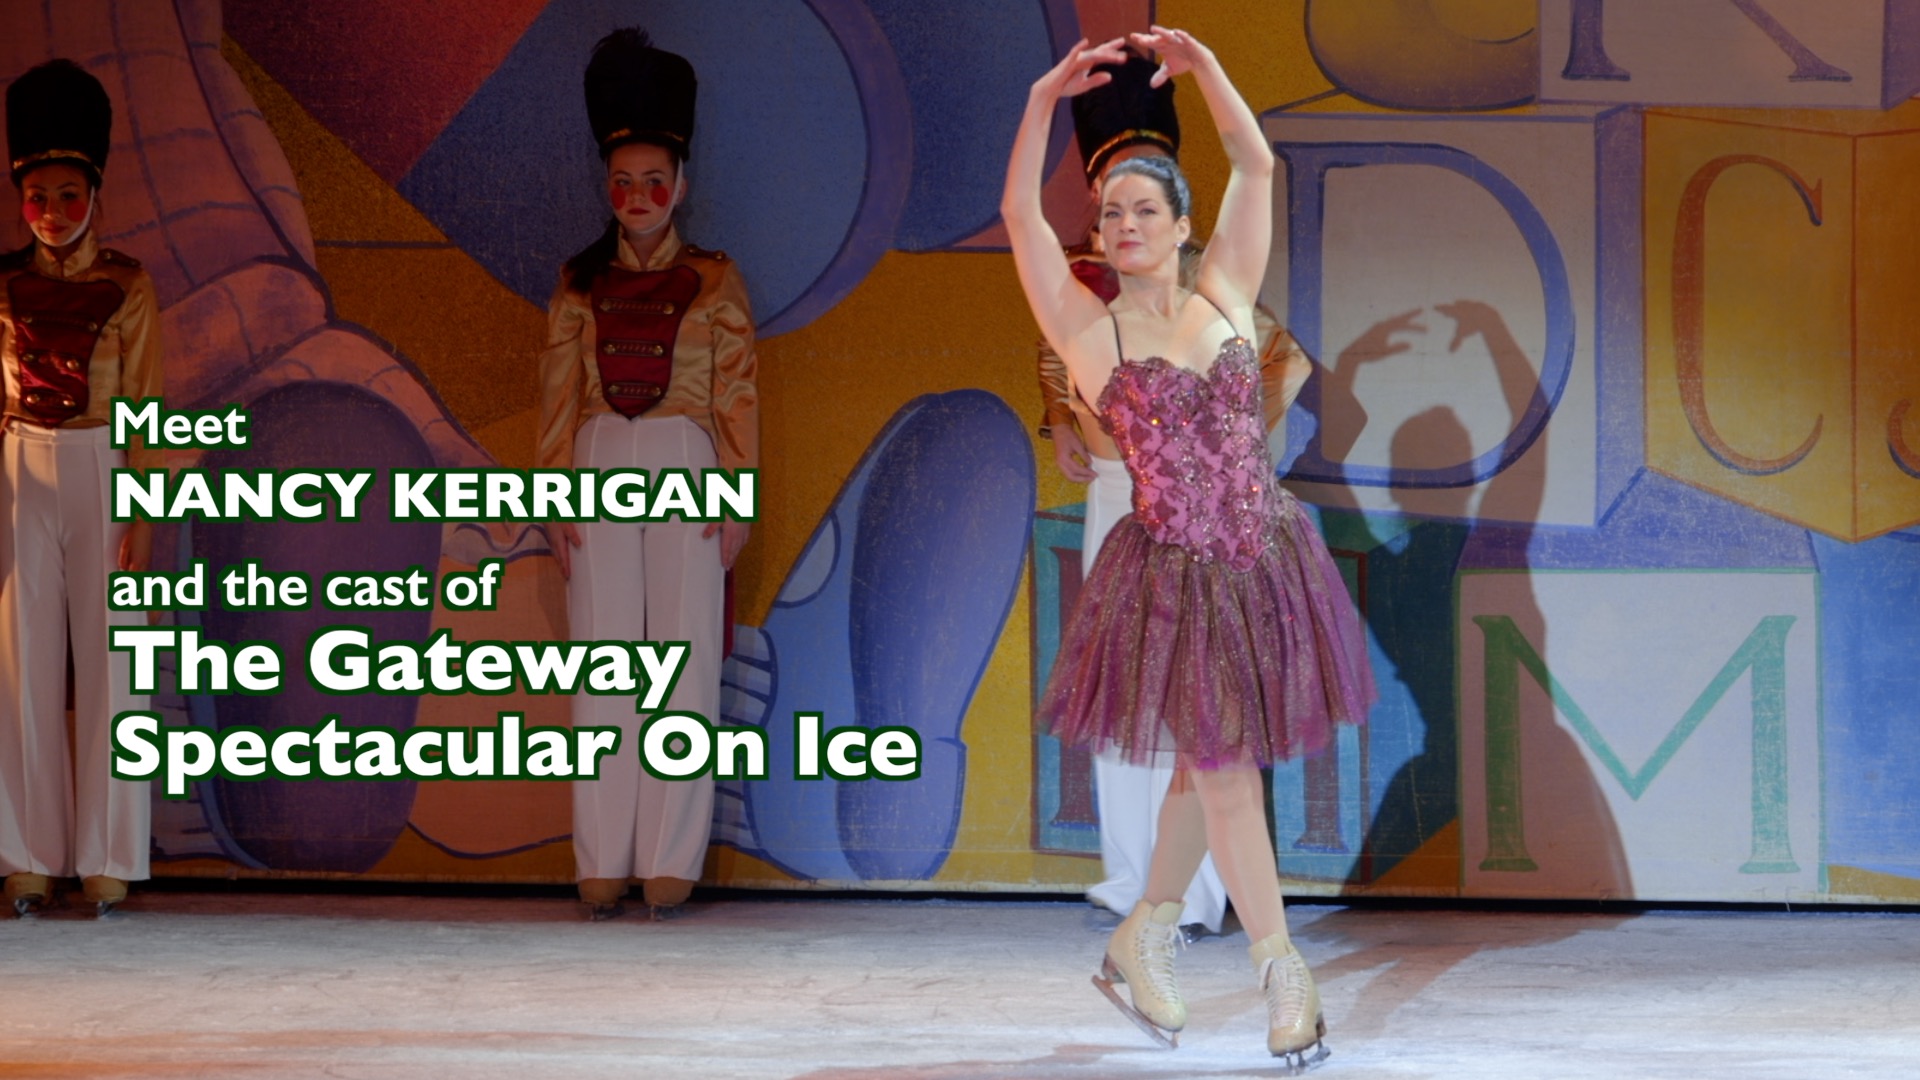 Meet Nancy Kerrigan and the Cast of The Gateway Holiday Spectacular on Ice 2021